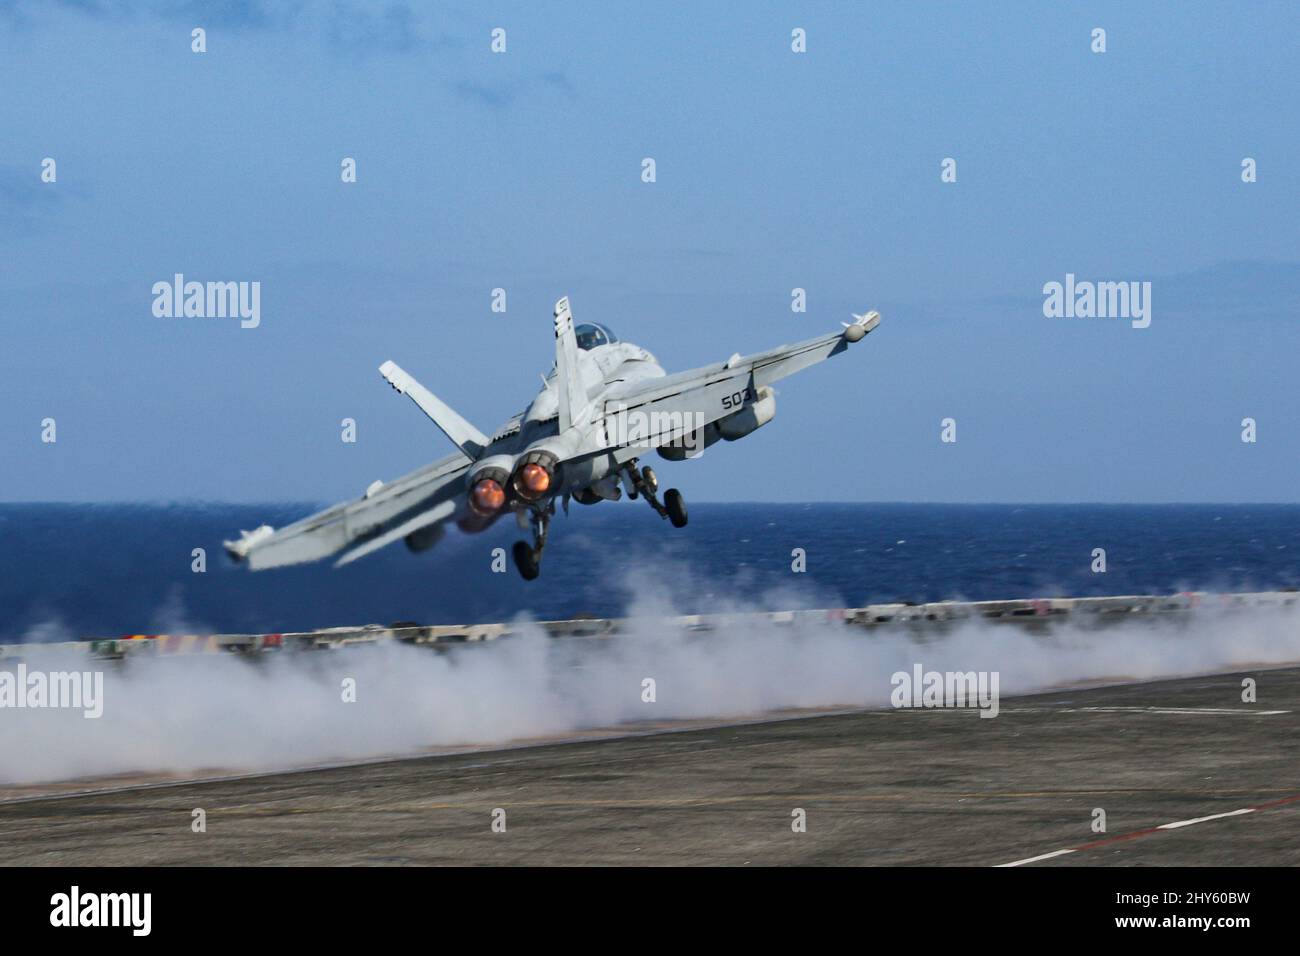 PHILIPPINE SEA (March 13, 2022) An EA-18G Growler, assigned to the "Wizards" of Electronic Attack Squadron (VAQ) 133, launches from the flight deck of the Nimitz-class aircraft carrier USS Abraham Lincoln (CVN 72). Abraham Lincoln Strike Group is on a scheduled deployment in the U.S. 7th Fleet area of operations to enhance interoperability through alliances and partnerships while serving as a ready-response force in support of a free and open Indo-Pacific region. (U.S. Navy photo by Mass Communication Specialist Seaman Apprentice Julia Brockman) Stock Photo